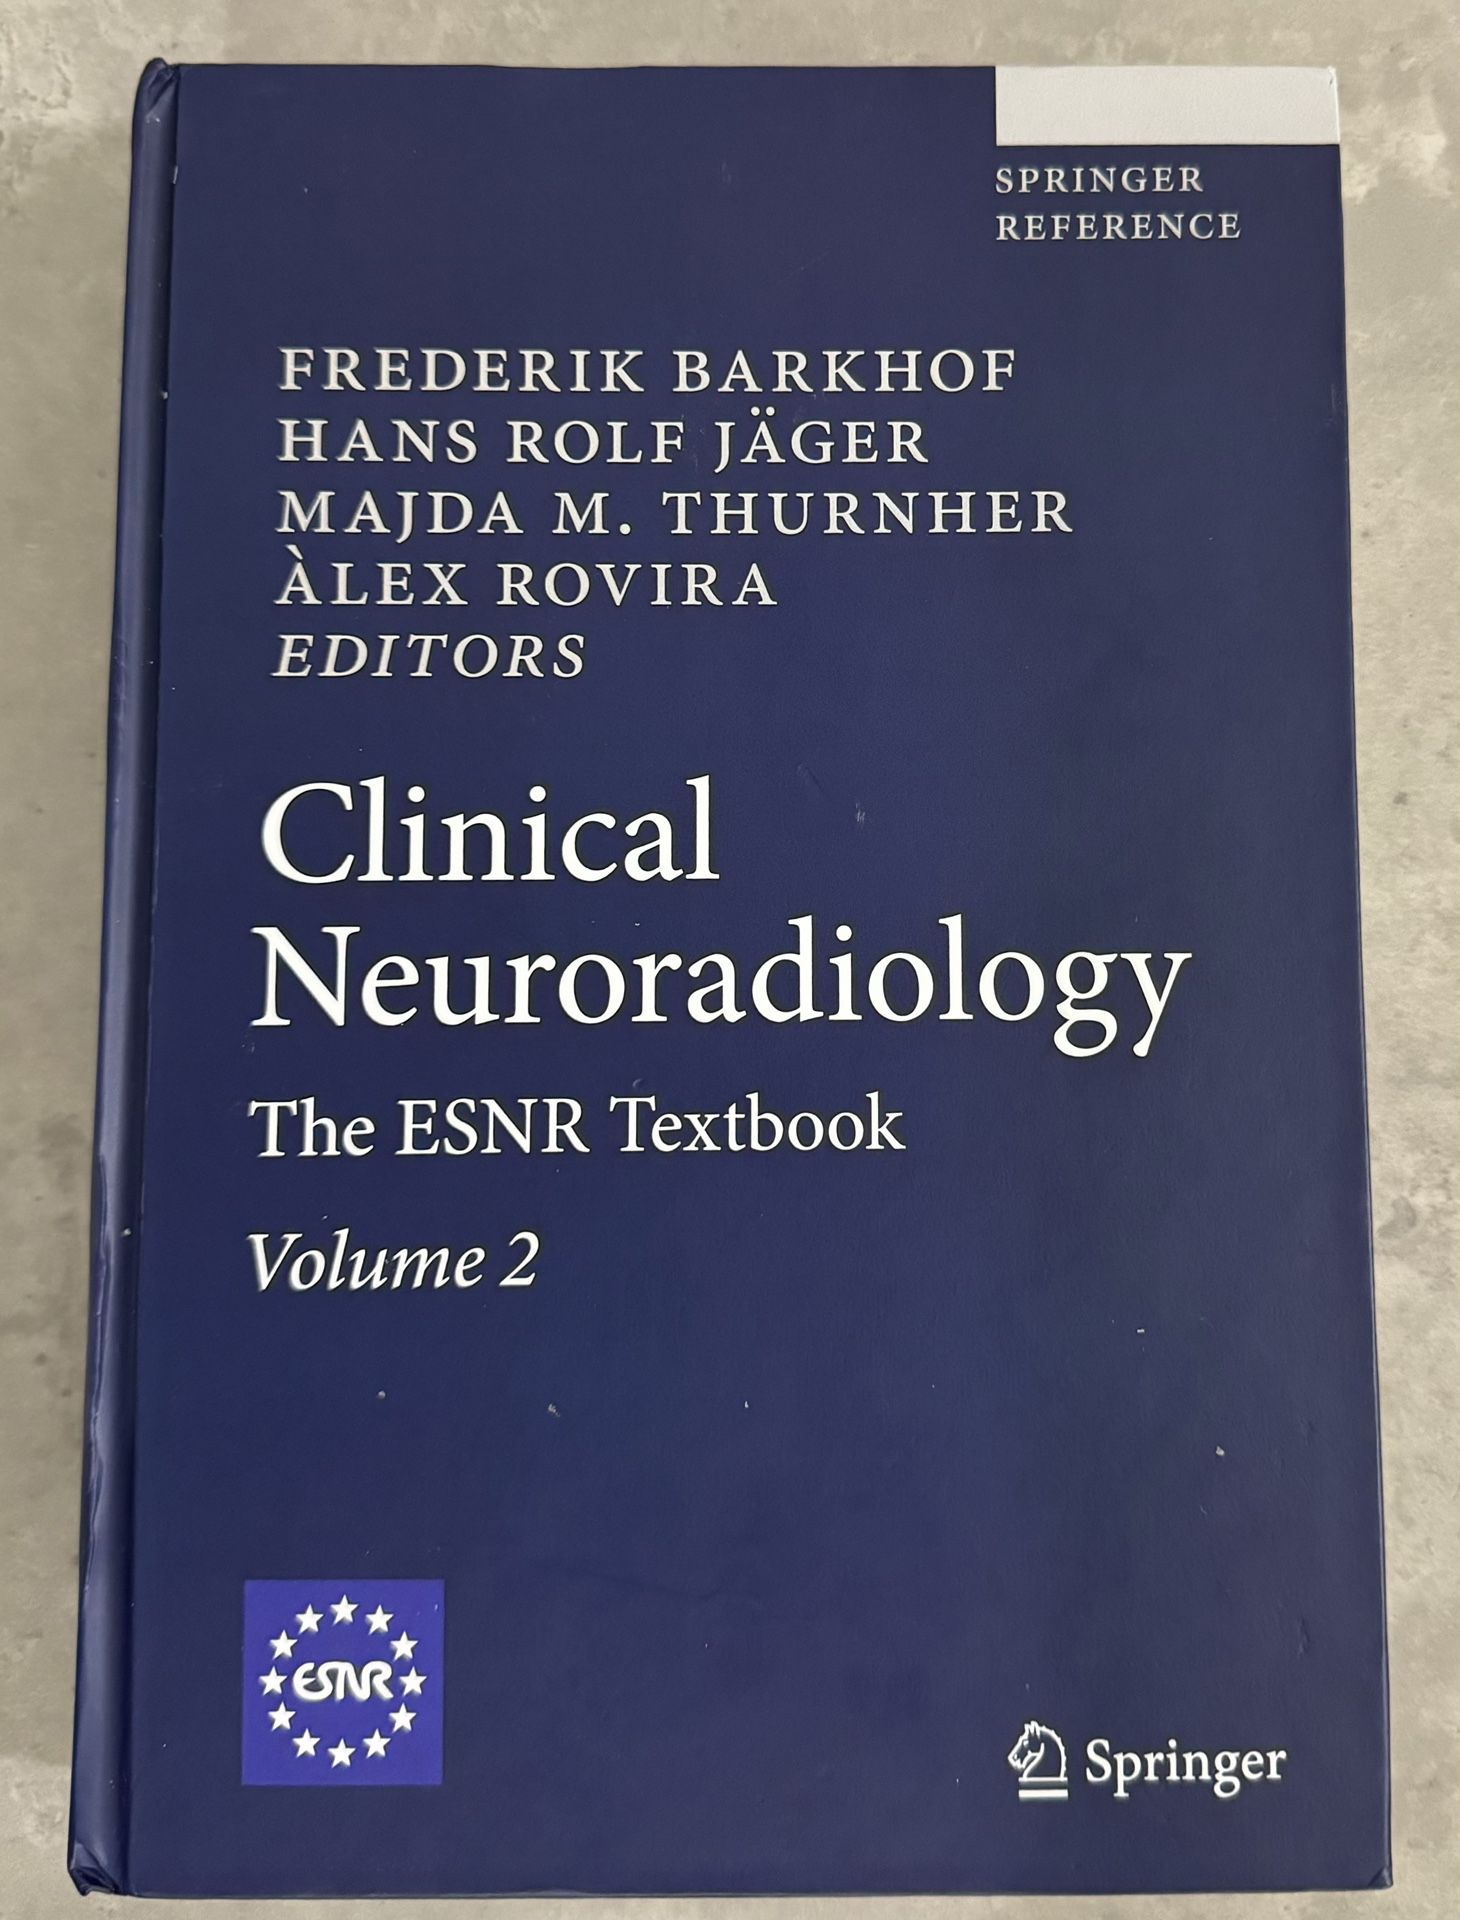 Clinical Neuroradiology : The ESNR Textbook by Barkhof  (2019, Hardcover) Vol 2